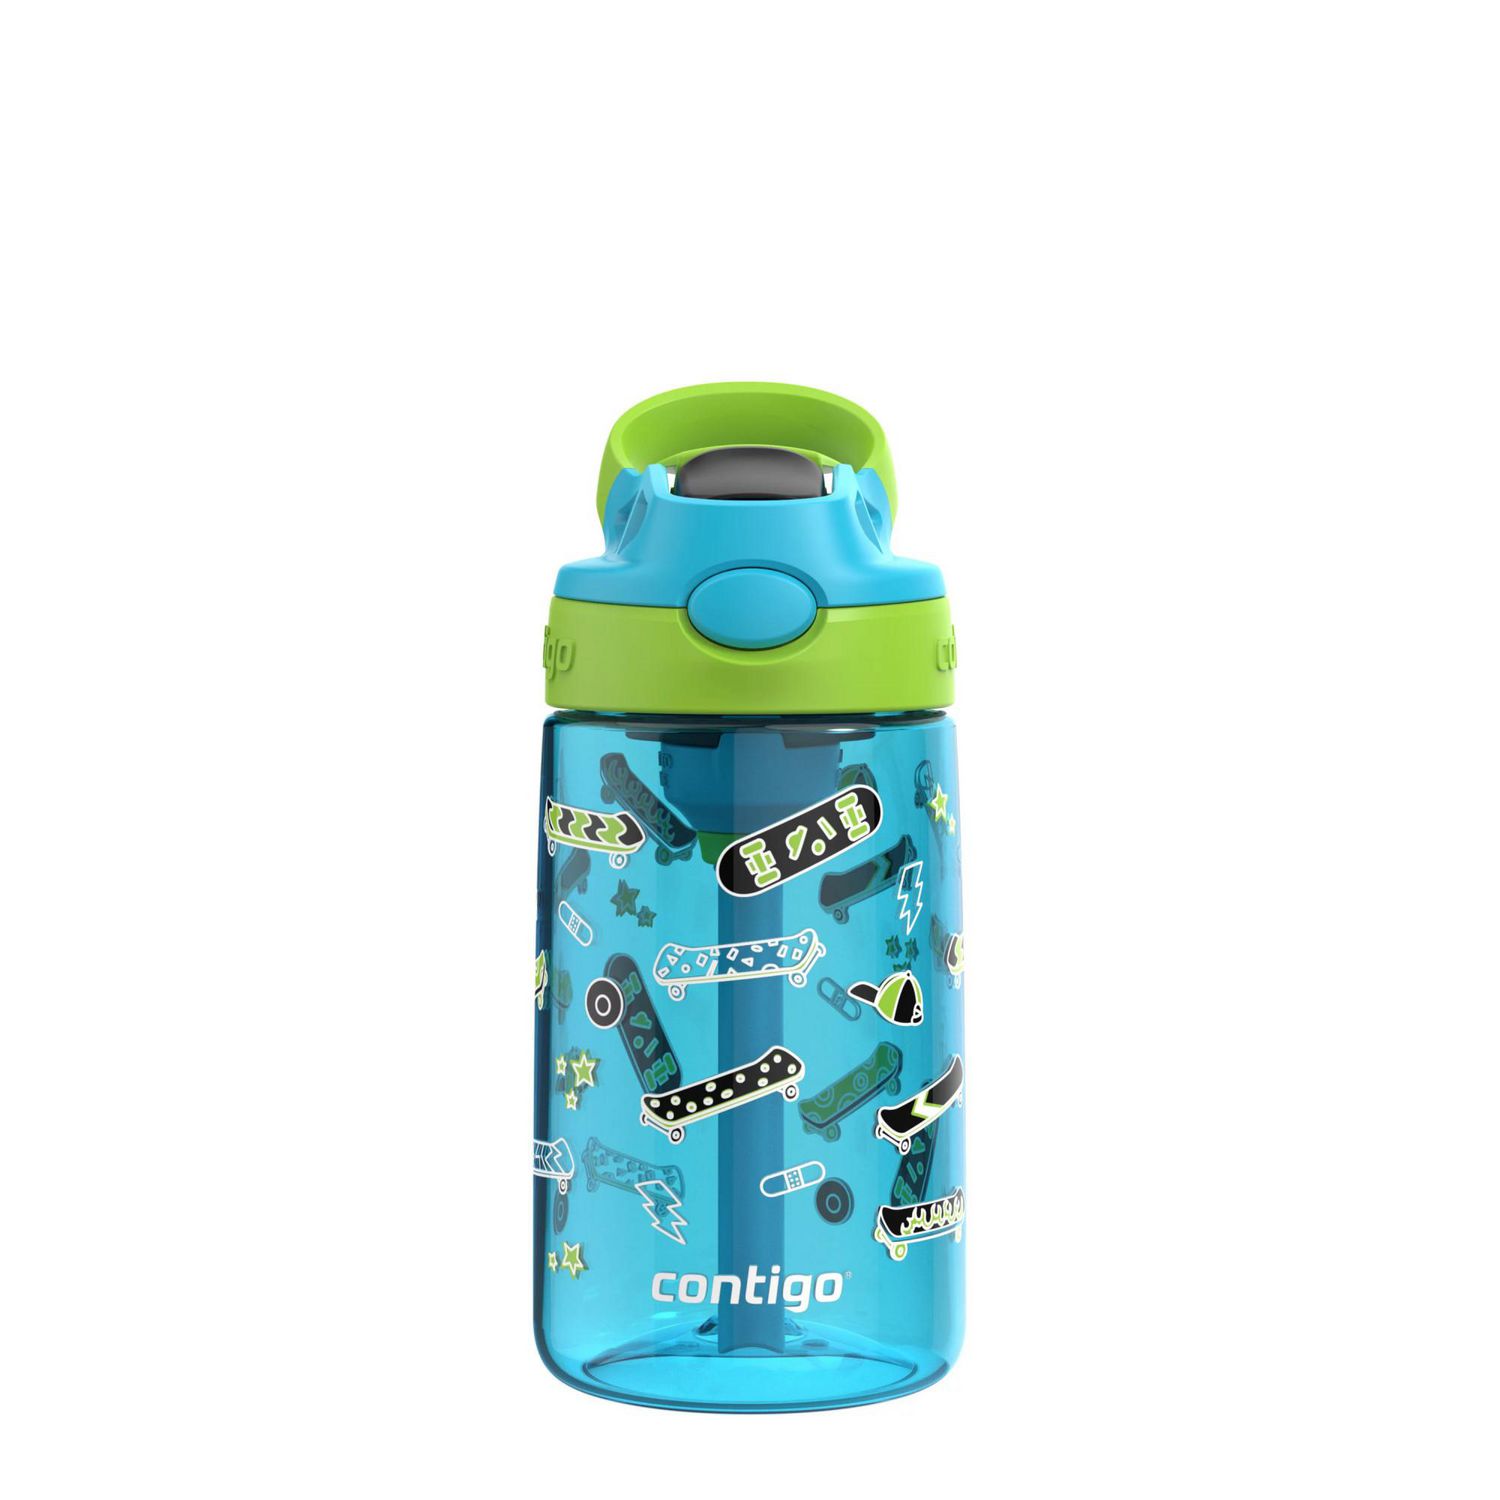 Coral Carrier – 5 Spot w/ Water Tight Container & Removable Frag